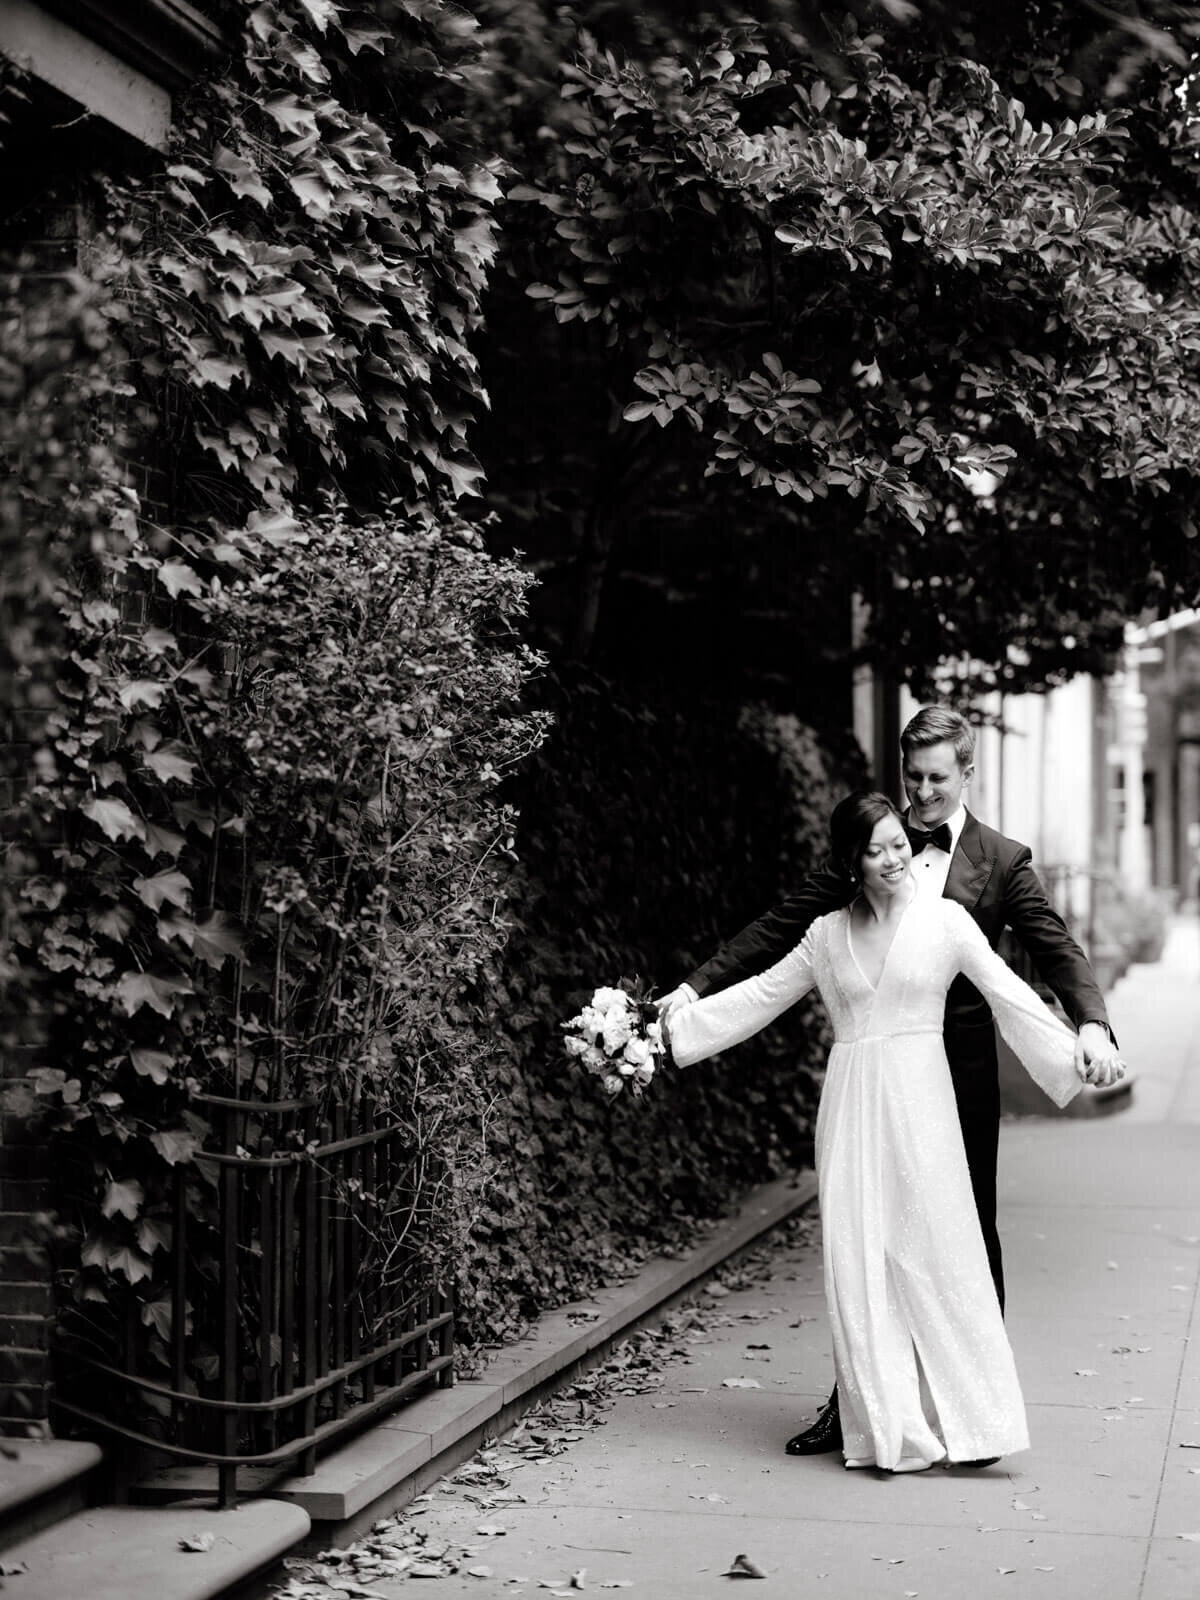 The groom is romantically lifting the bride's hands from behind, along a sidewalk in New York City. Image by Jenny Fu Studio